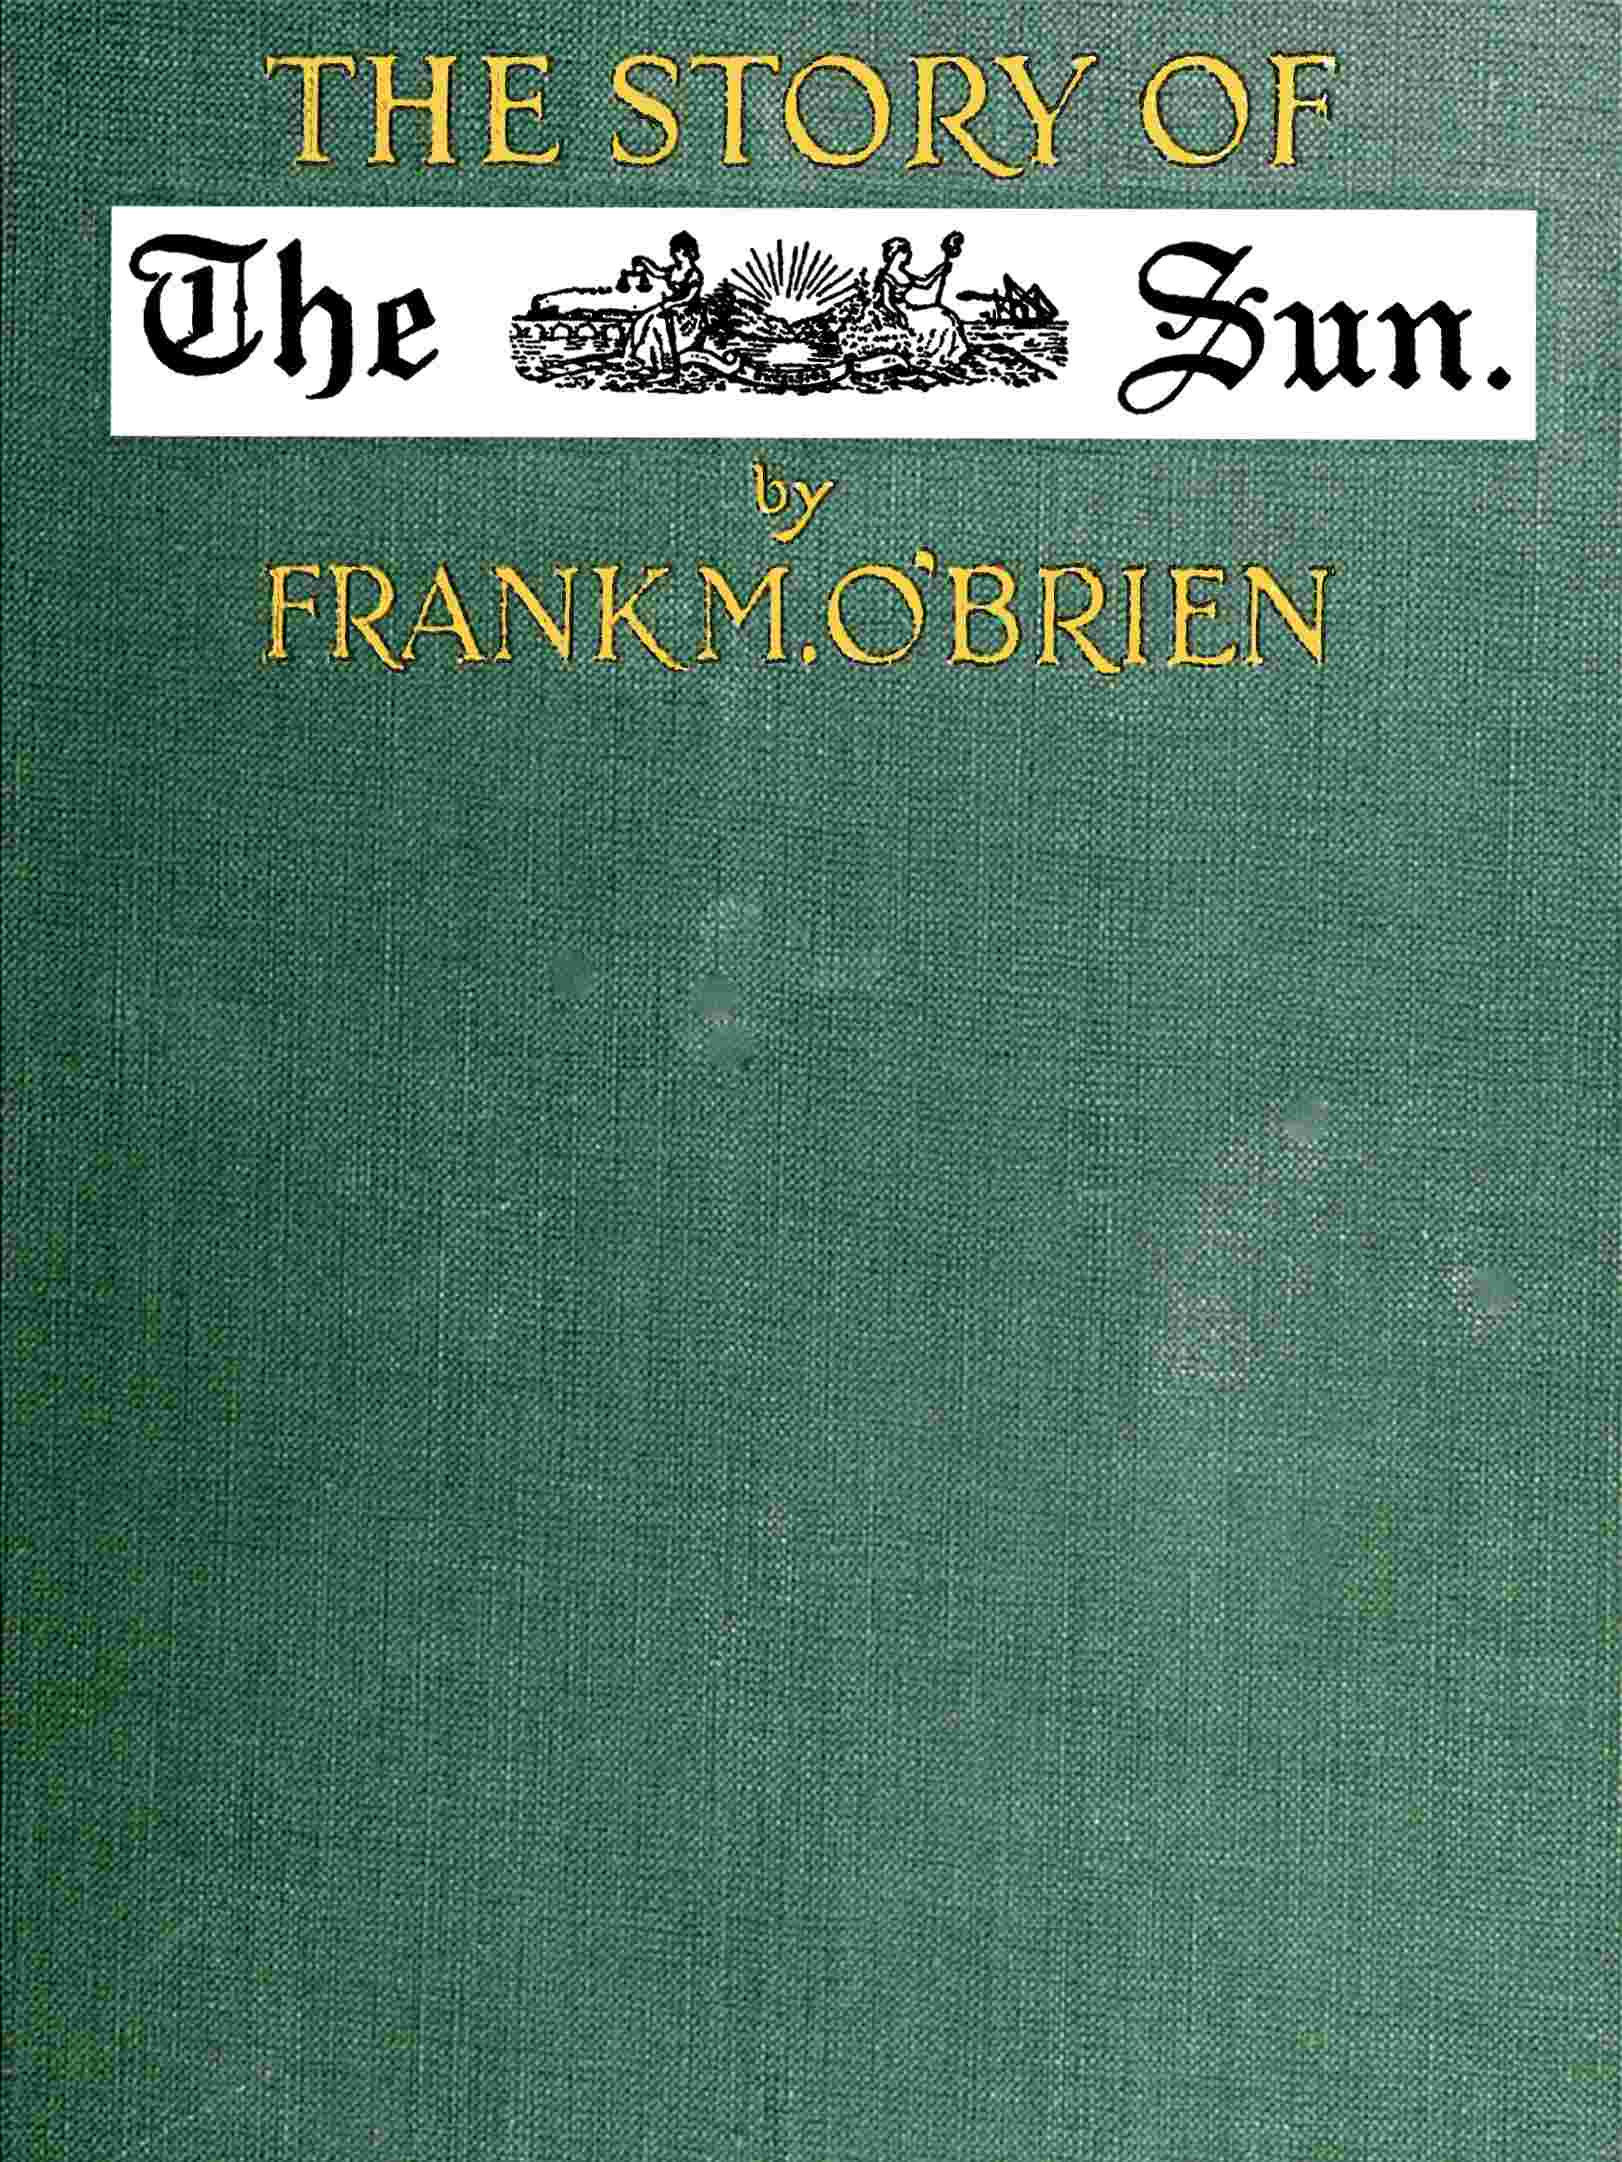 The Story of The Sun, by Frank M